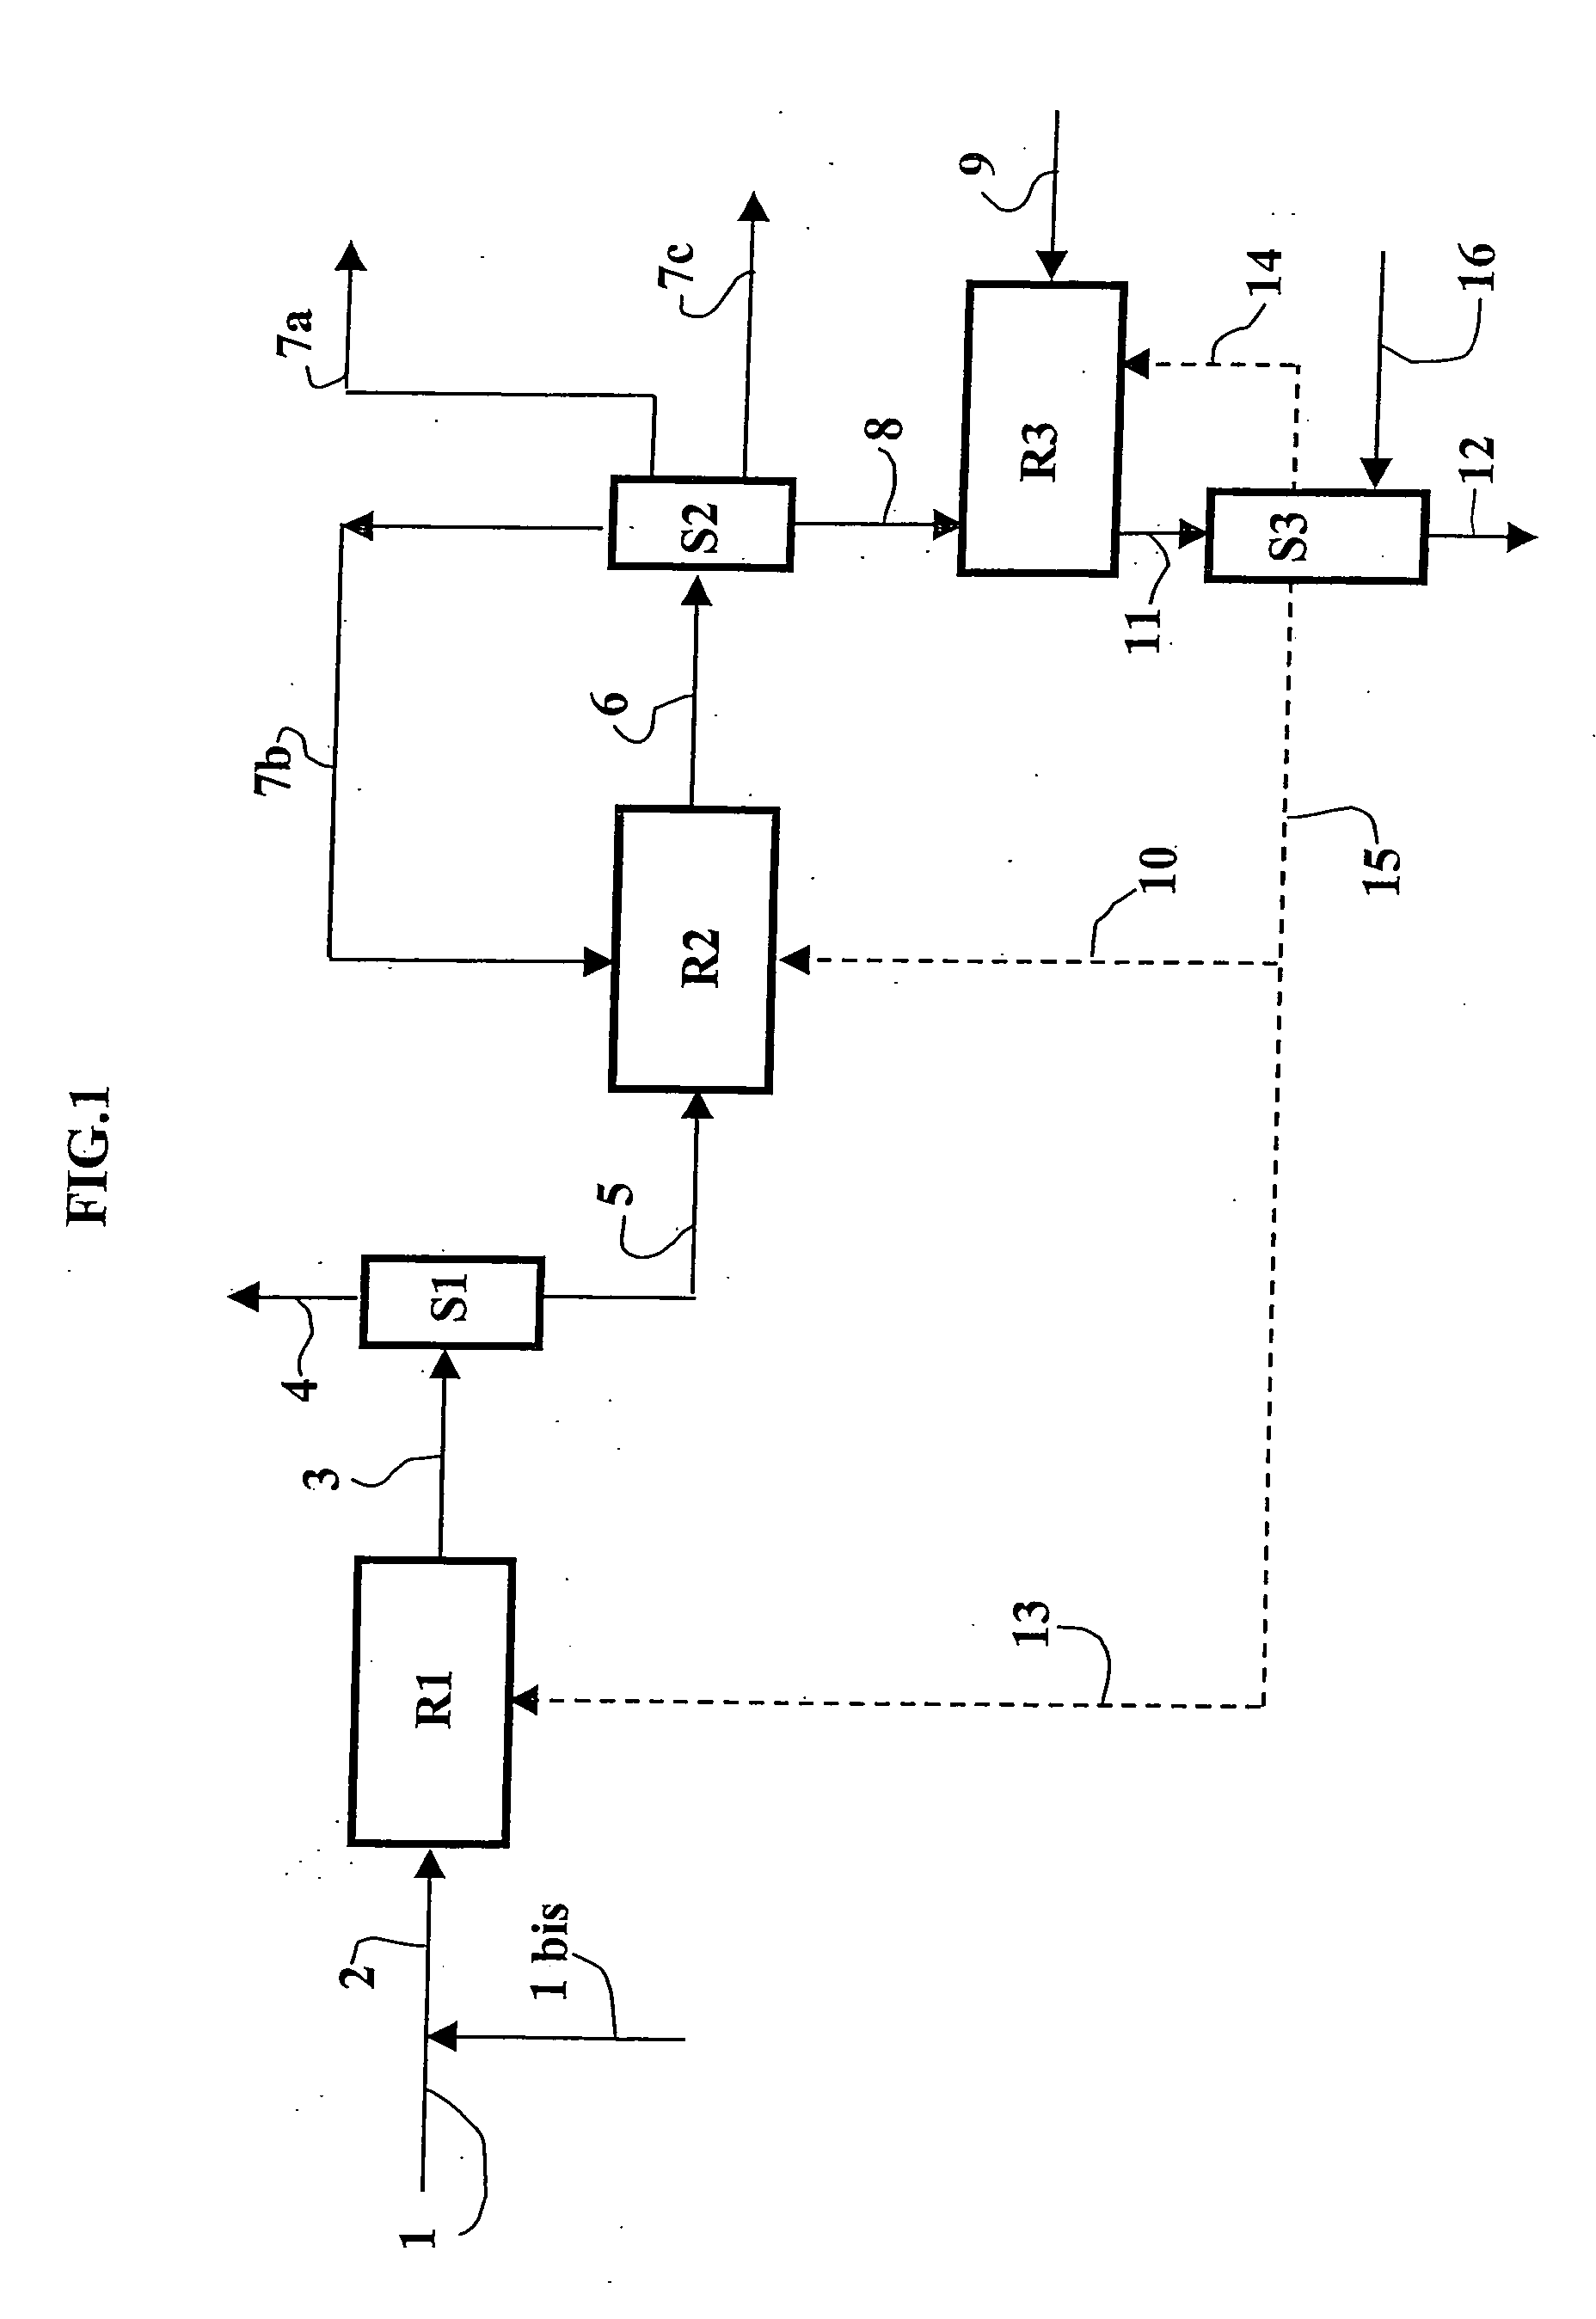 Process for multistage conversion of a charge comprising olefins with four, five or more carbon atoms, with the aim of producing propylene